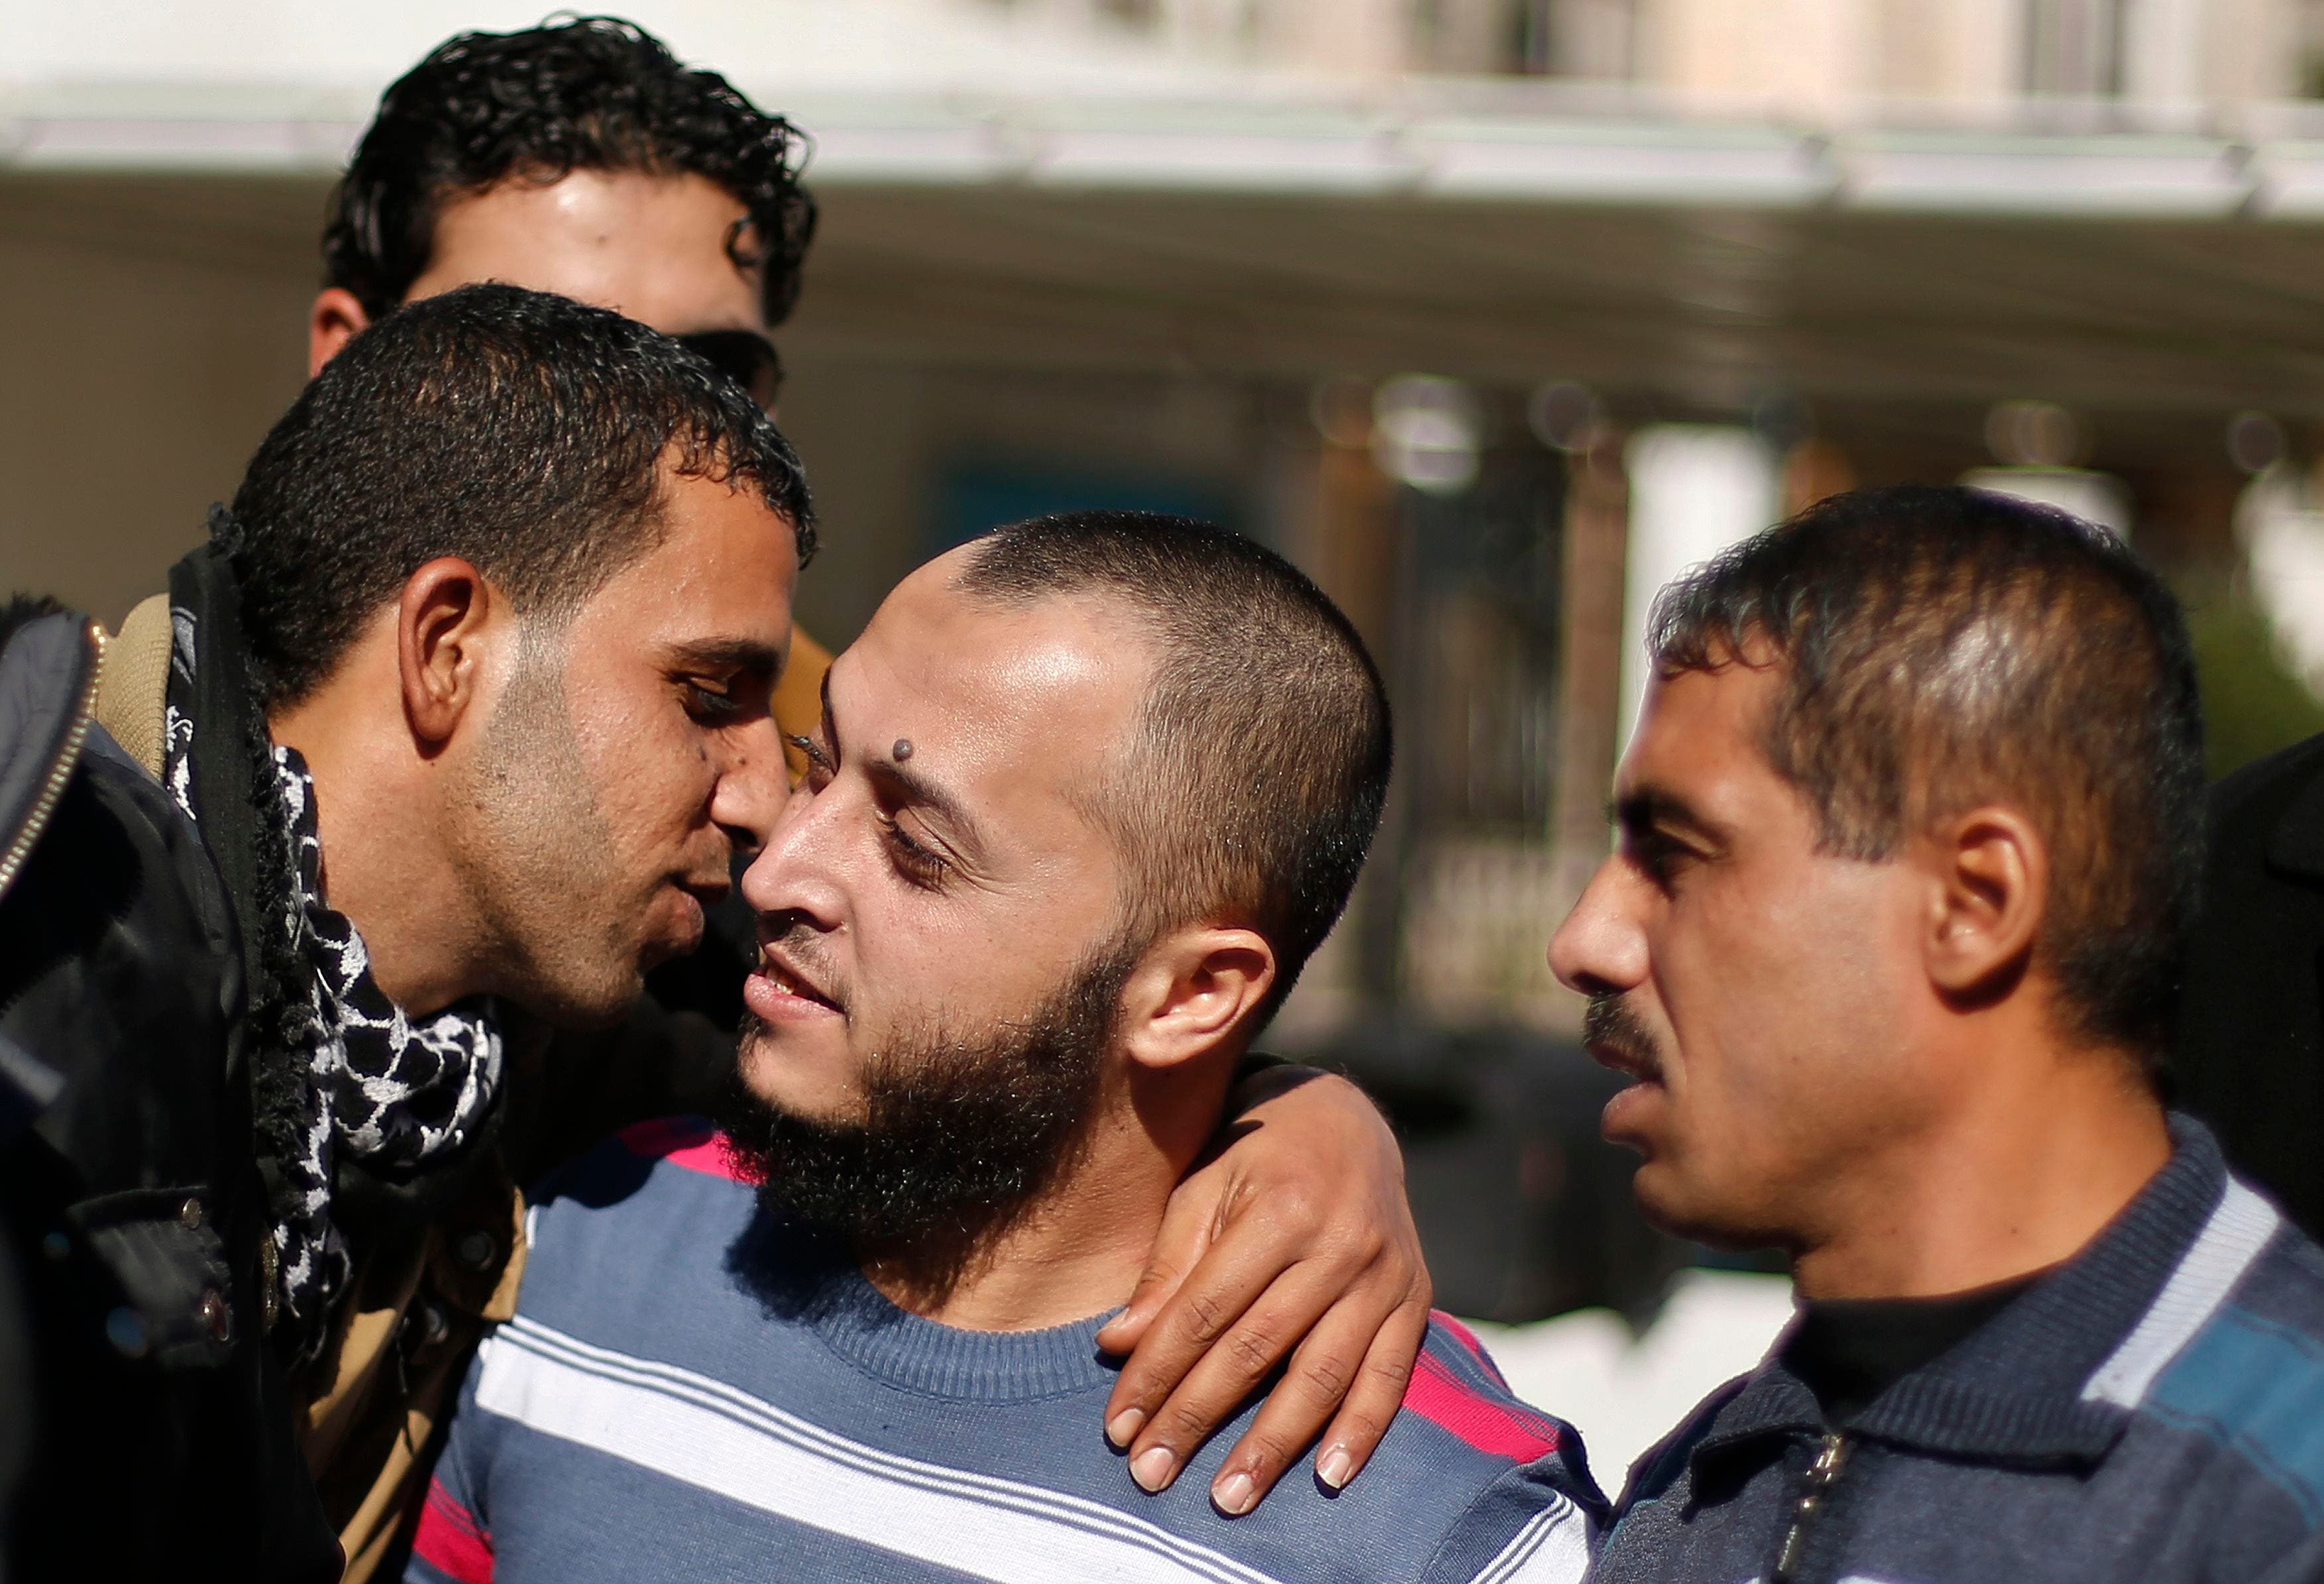 Palestinians welcome freed relatives